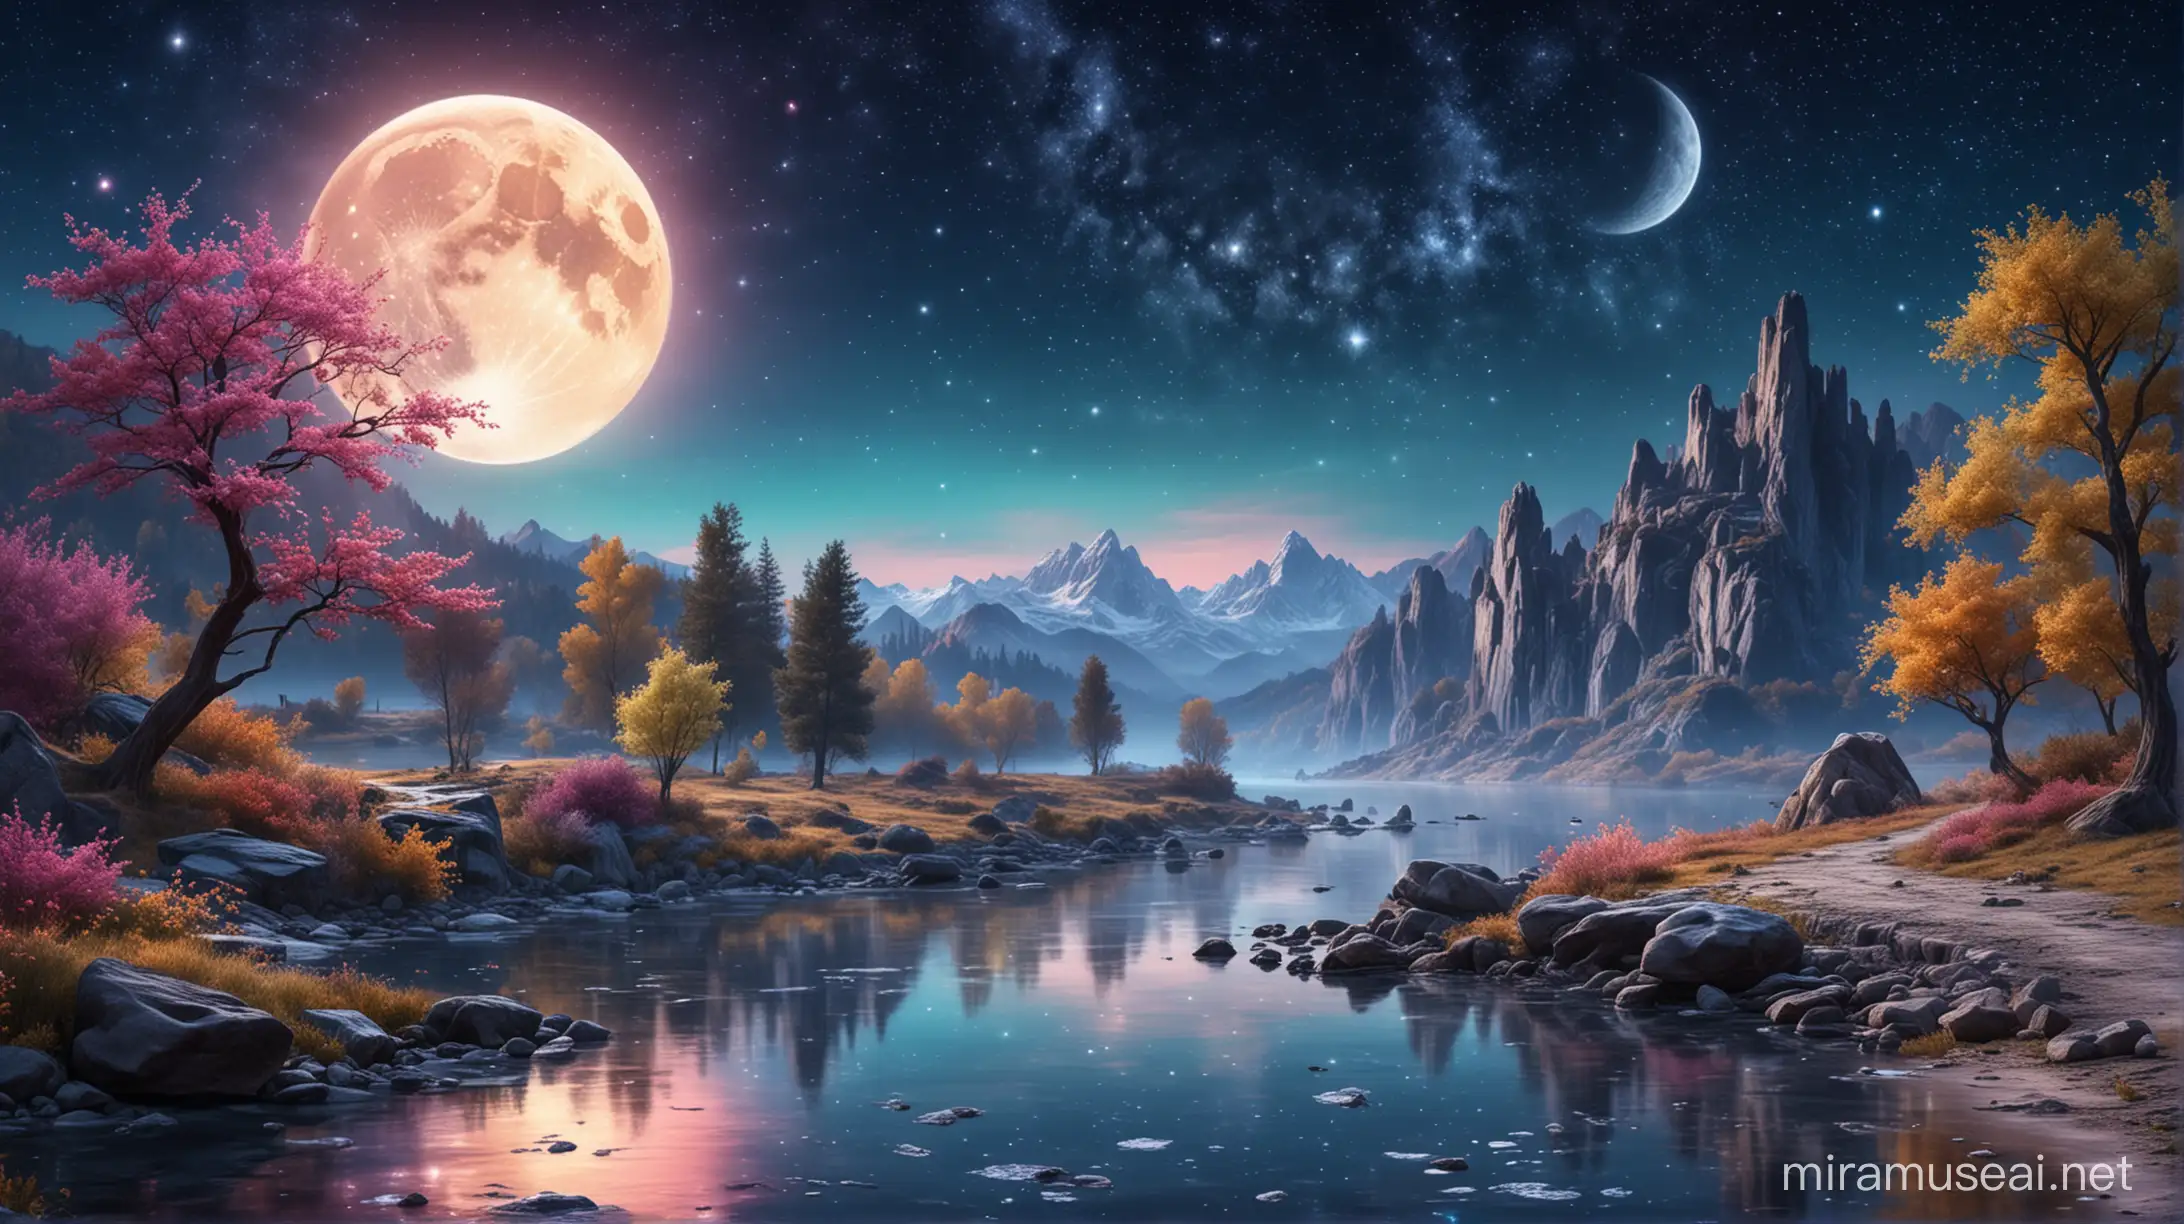 Enchanting Fairytale Landscape with Moonlit River and Sparkling Stars